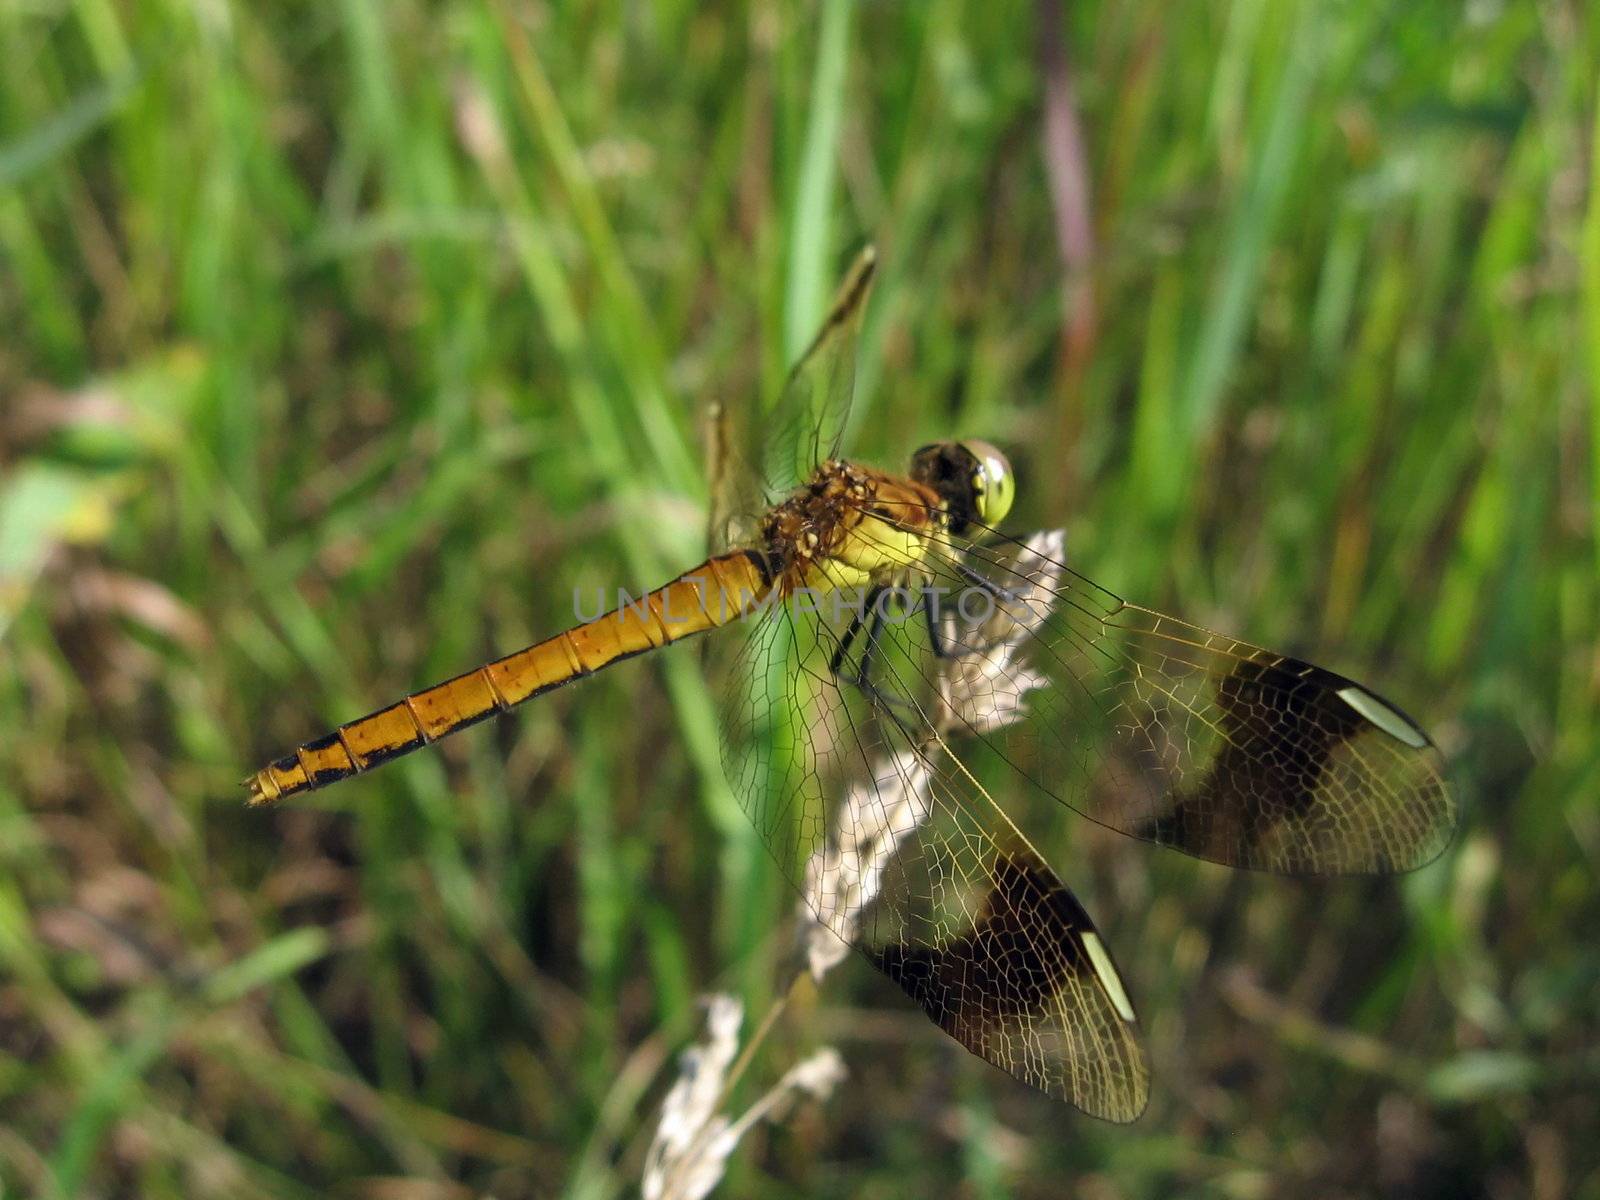 Large dragonfly sits on the stalk on a background of field